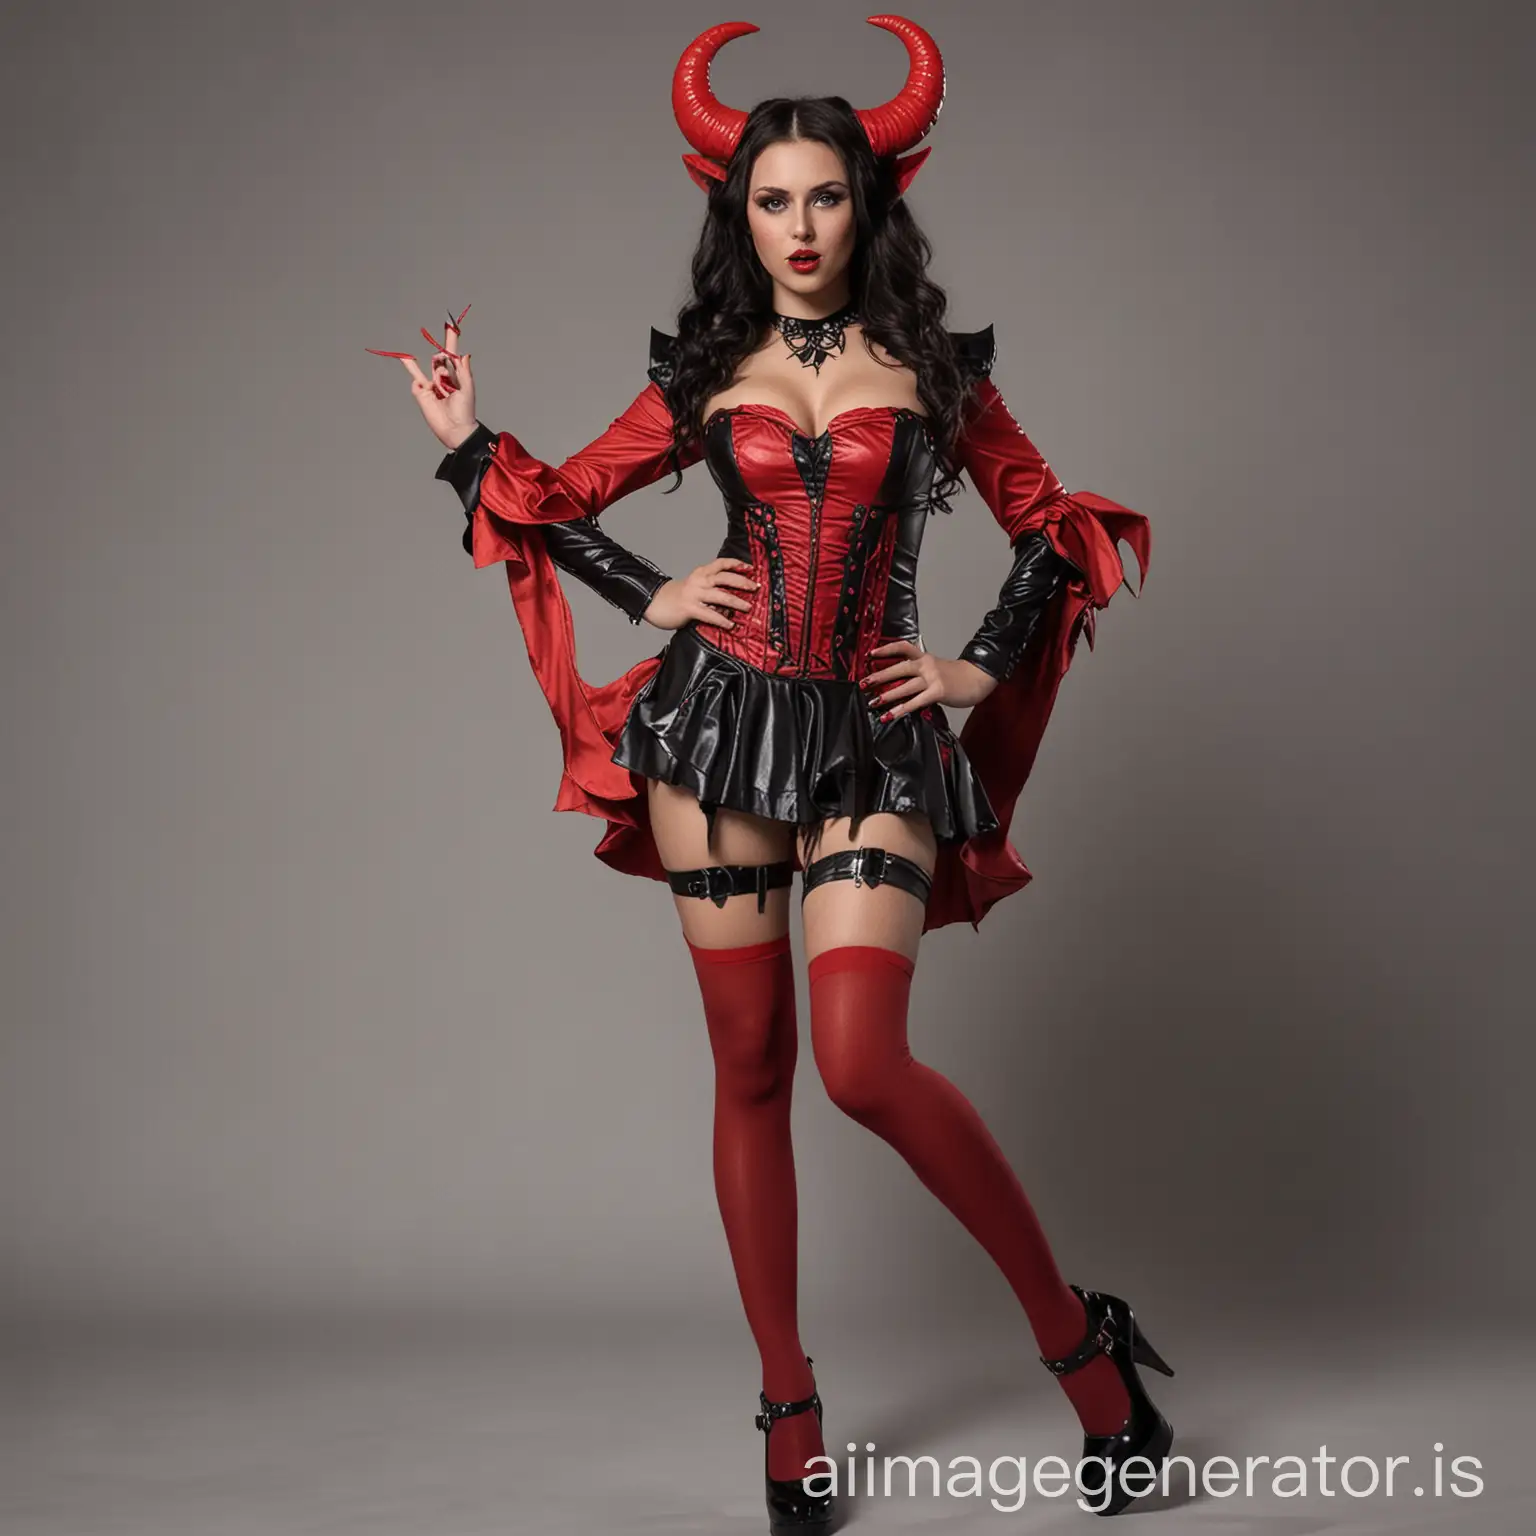 Seductive-Devil-Girl-in-Alluring-Costume-with-Horns